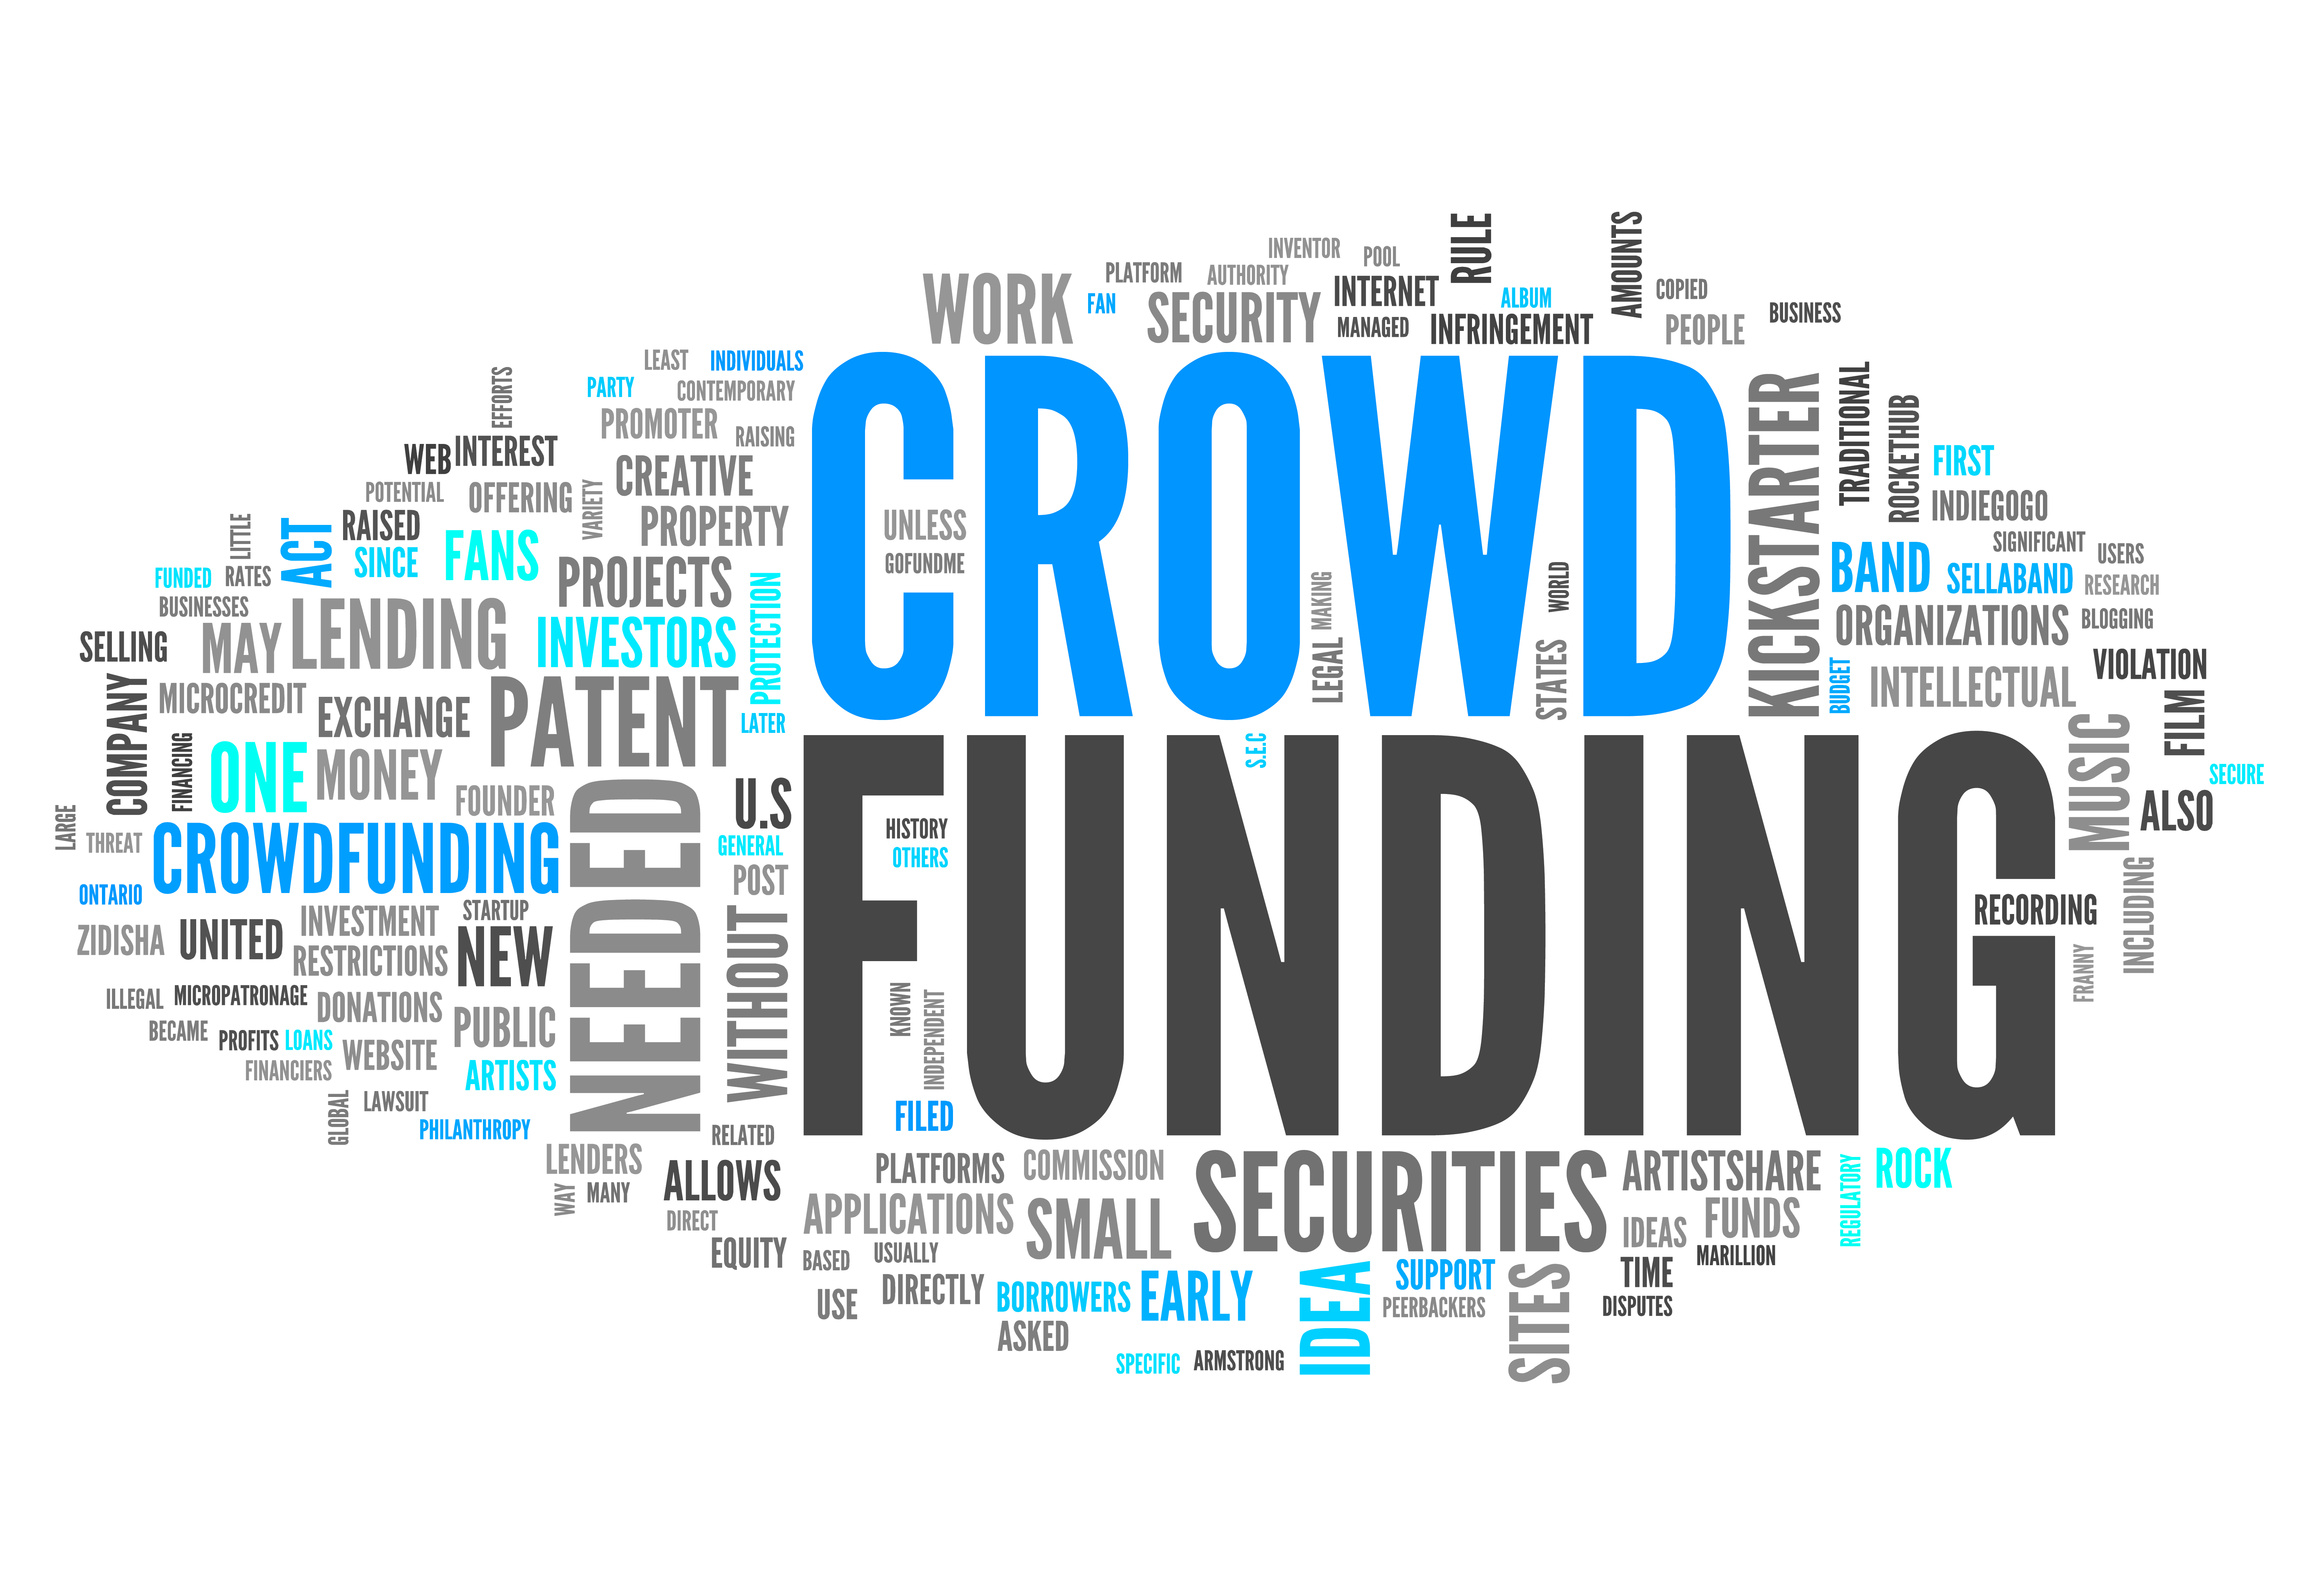 Early equity crowdfunding results from Reg CF and SEC